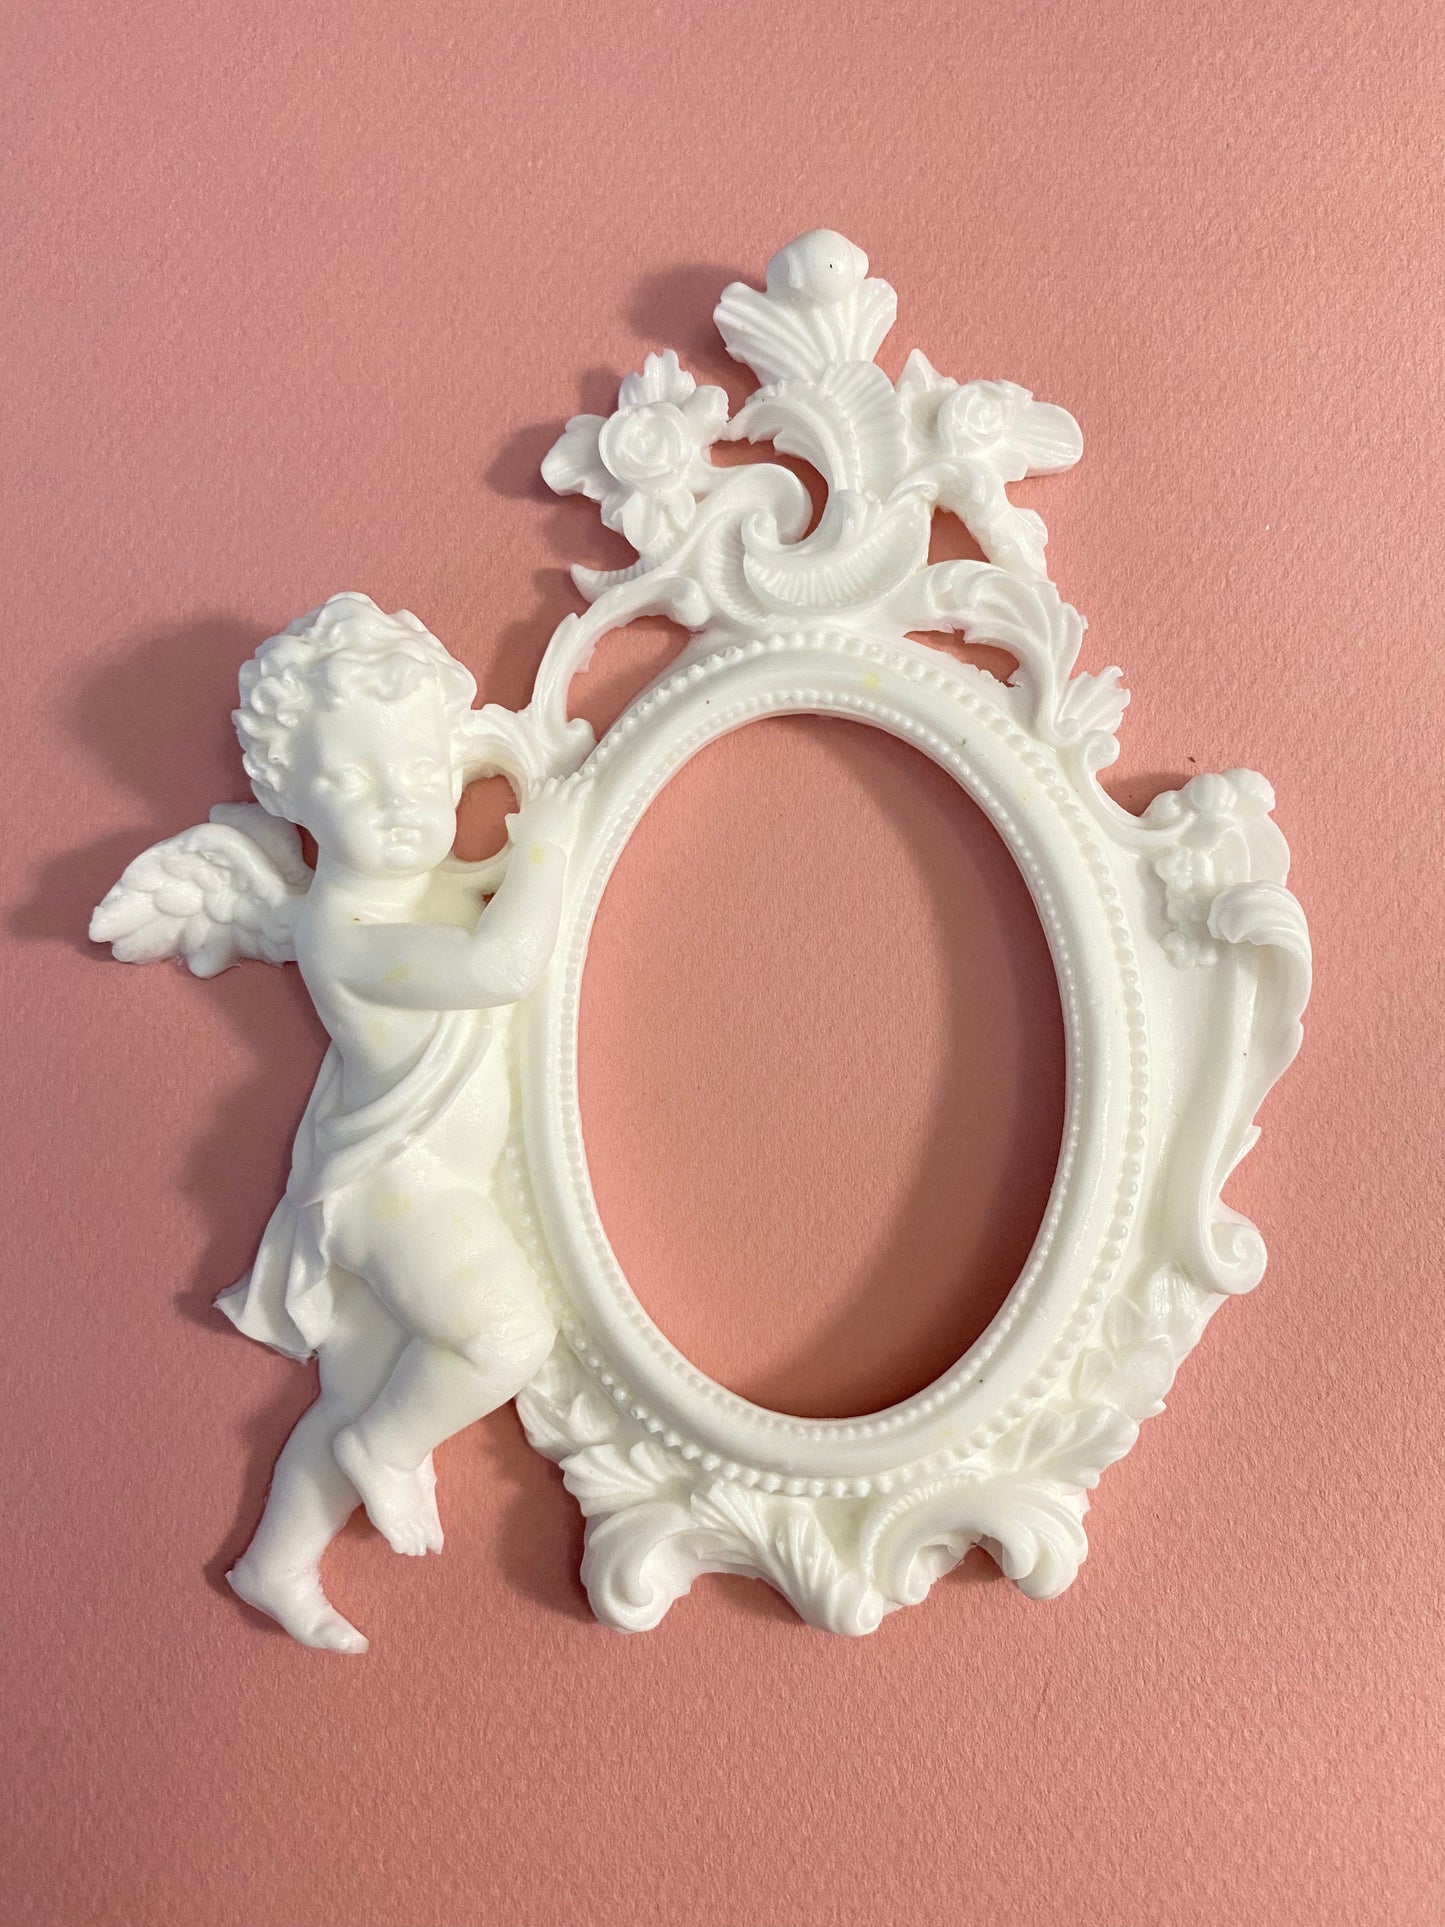 Cherub with Oval Frame - Resin casting